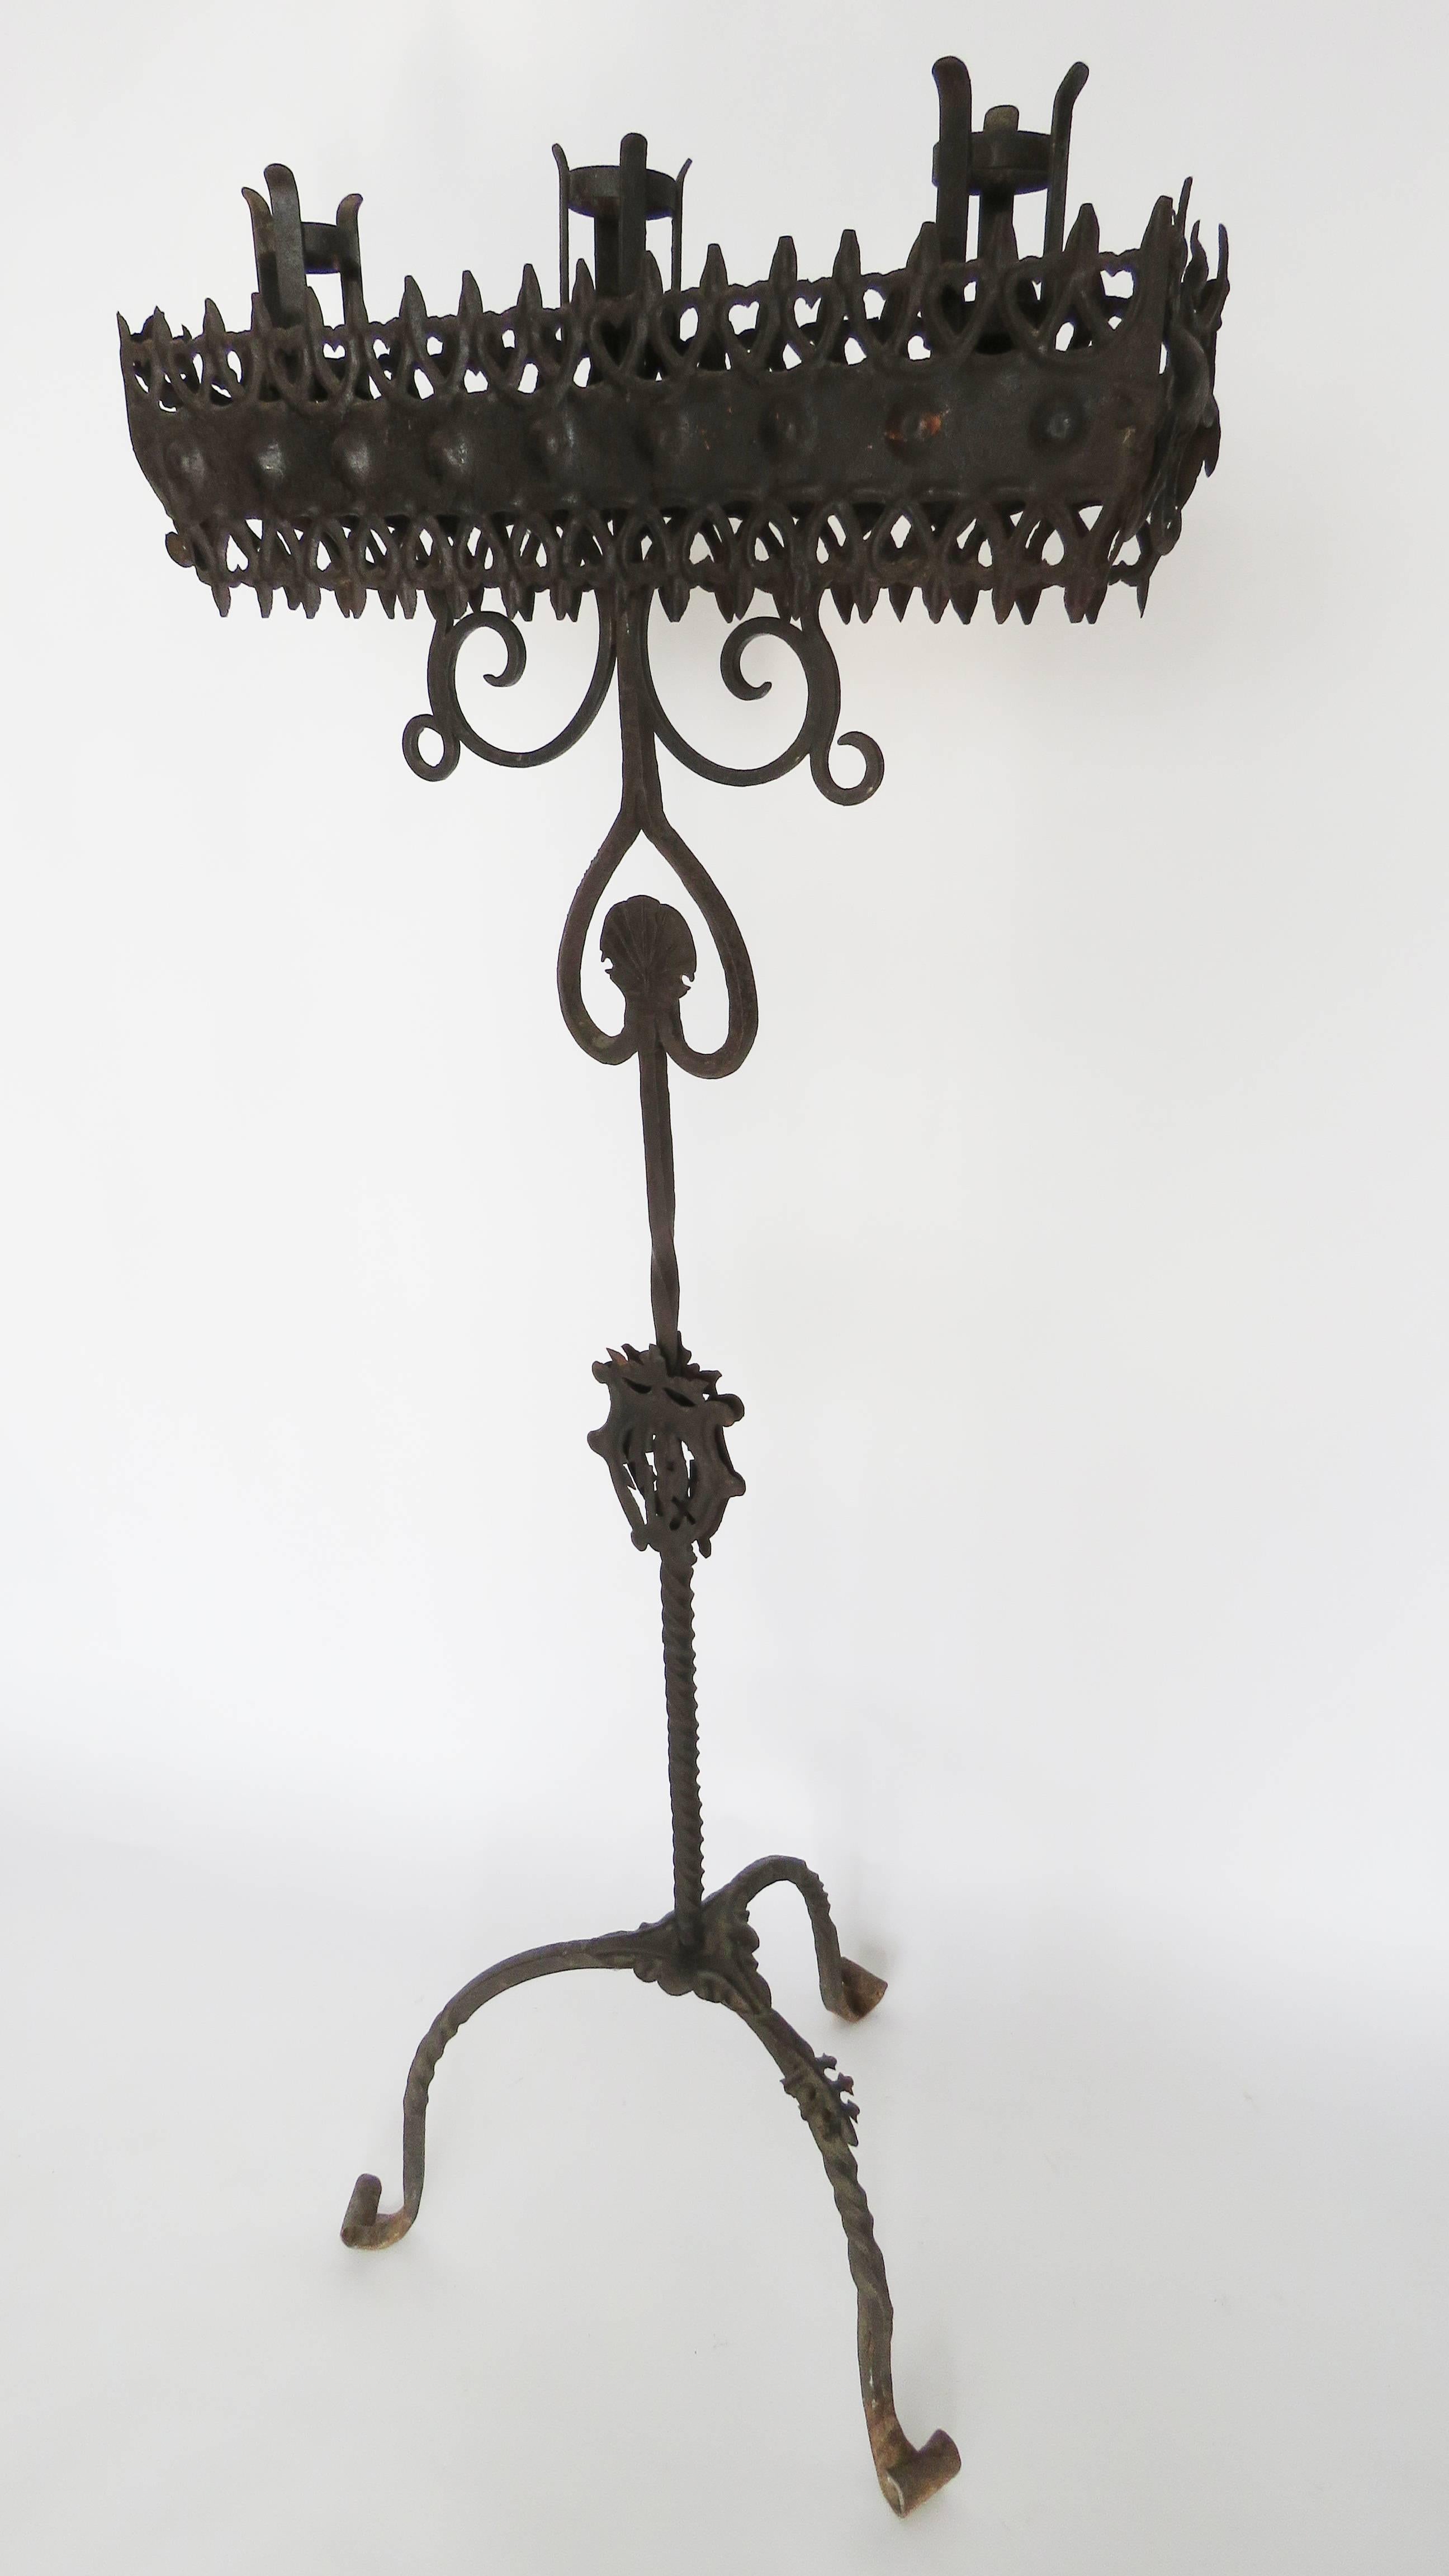 Three candle light surrounded by elaborately decorated platform on a twisted rod standard supported by tripod base. It could be reconverted into floor lamp if rewired. Beautiful age patina.